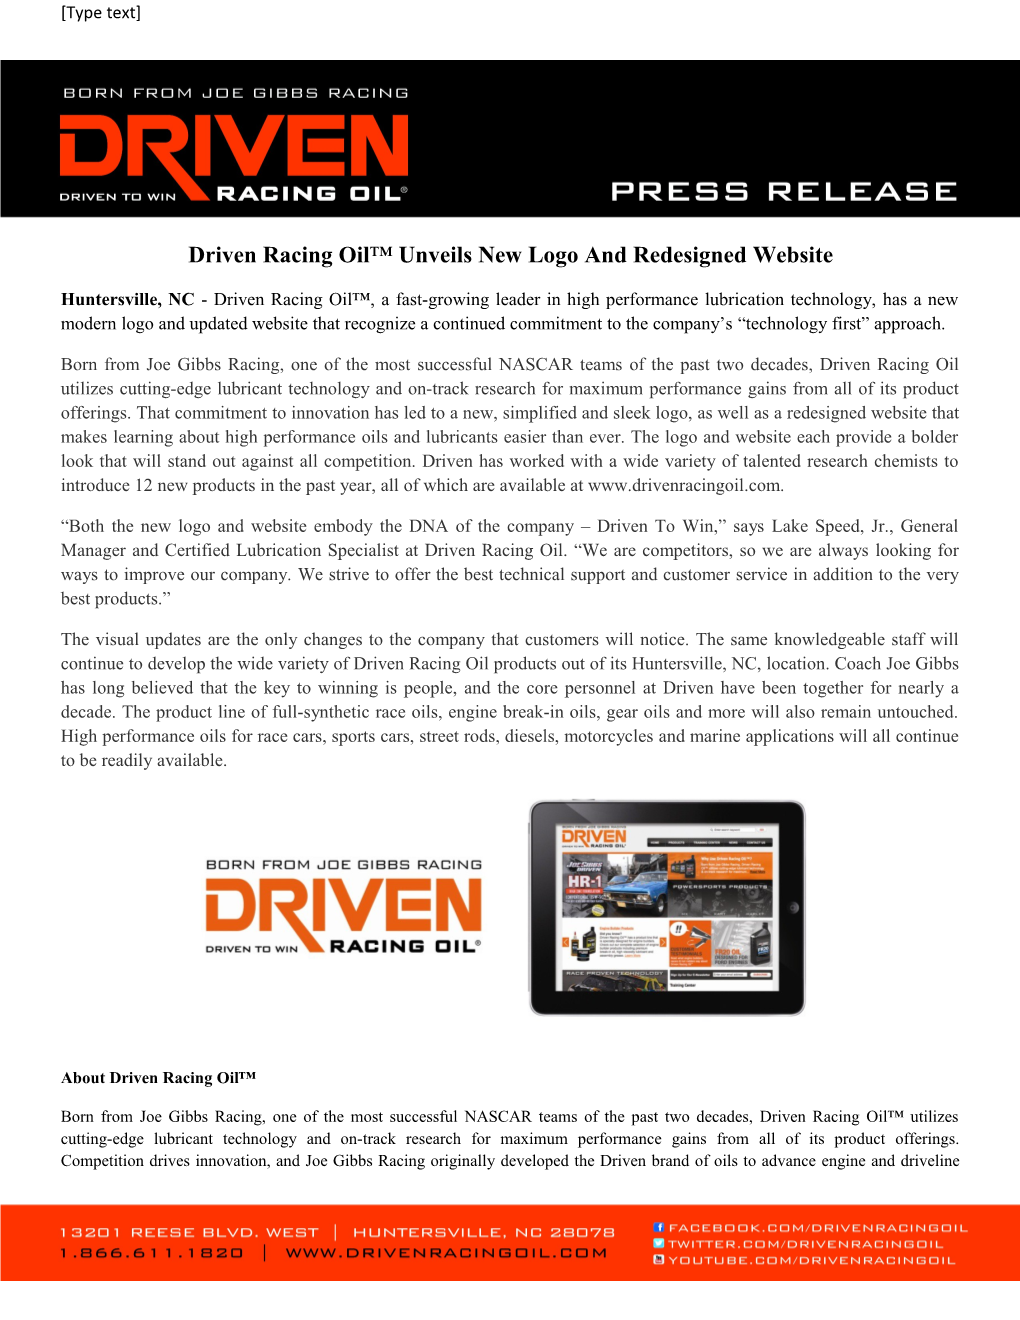 Driven Racing Oil Unveils New Logo and Redesigned Website